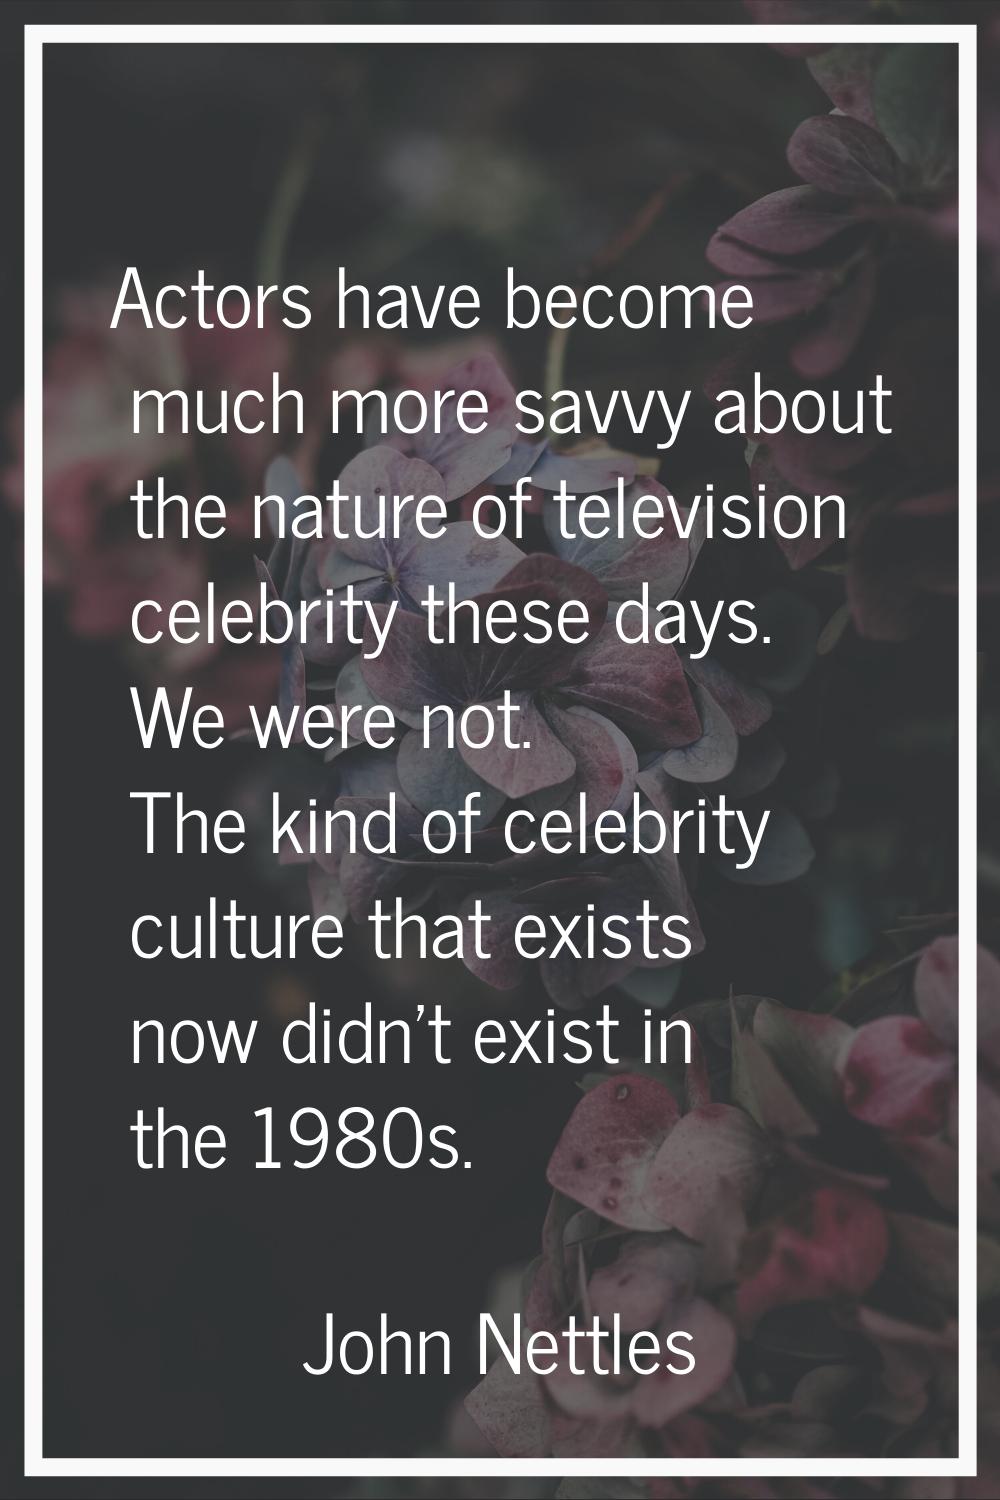 Actors have become much more savvy about the nature of television celebrity these days. We were not